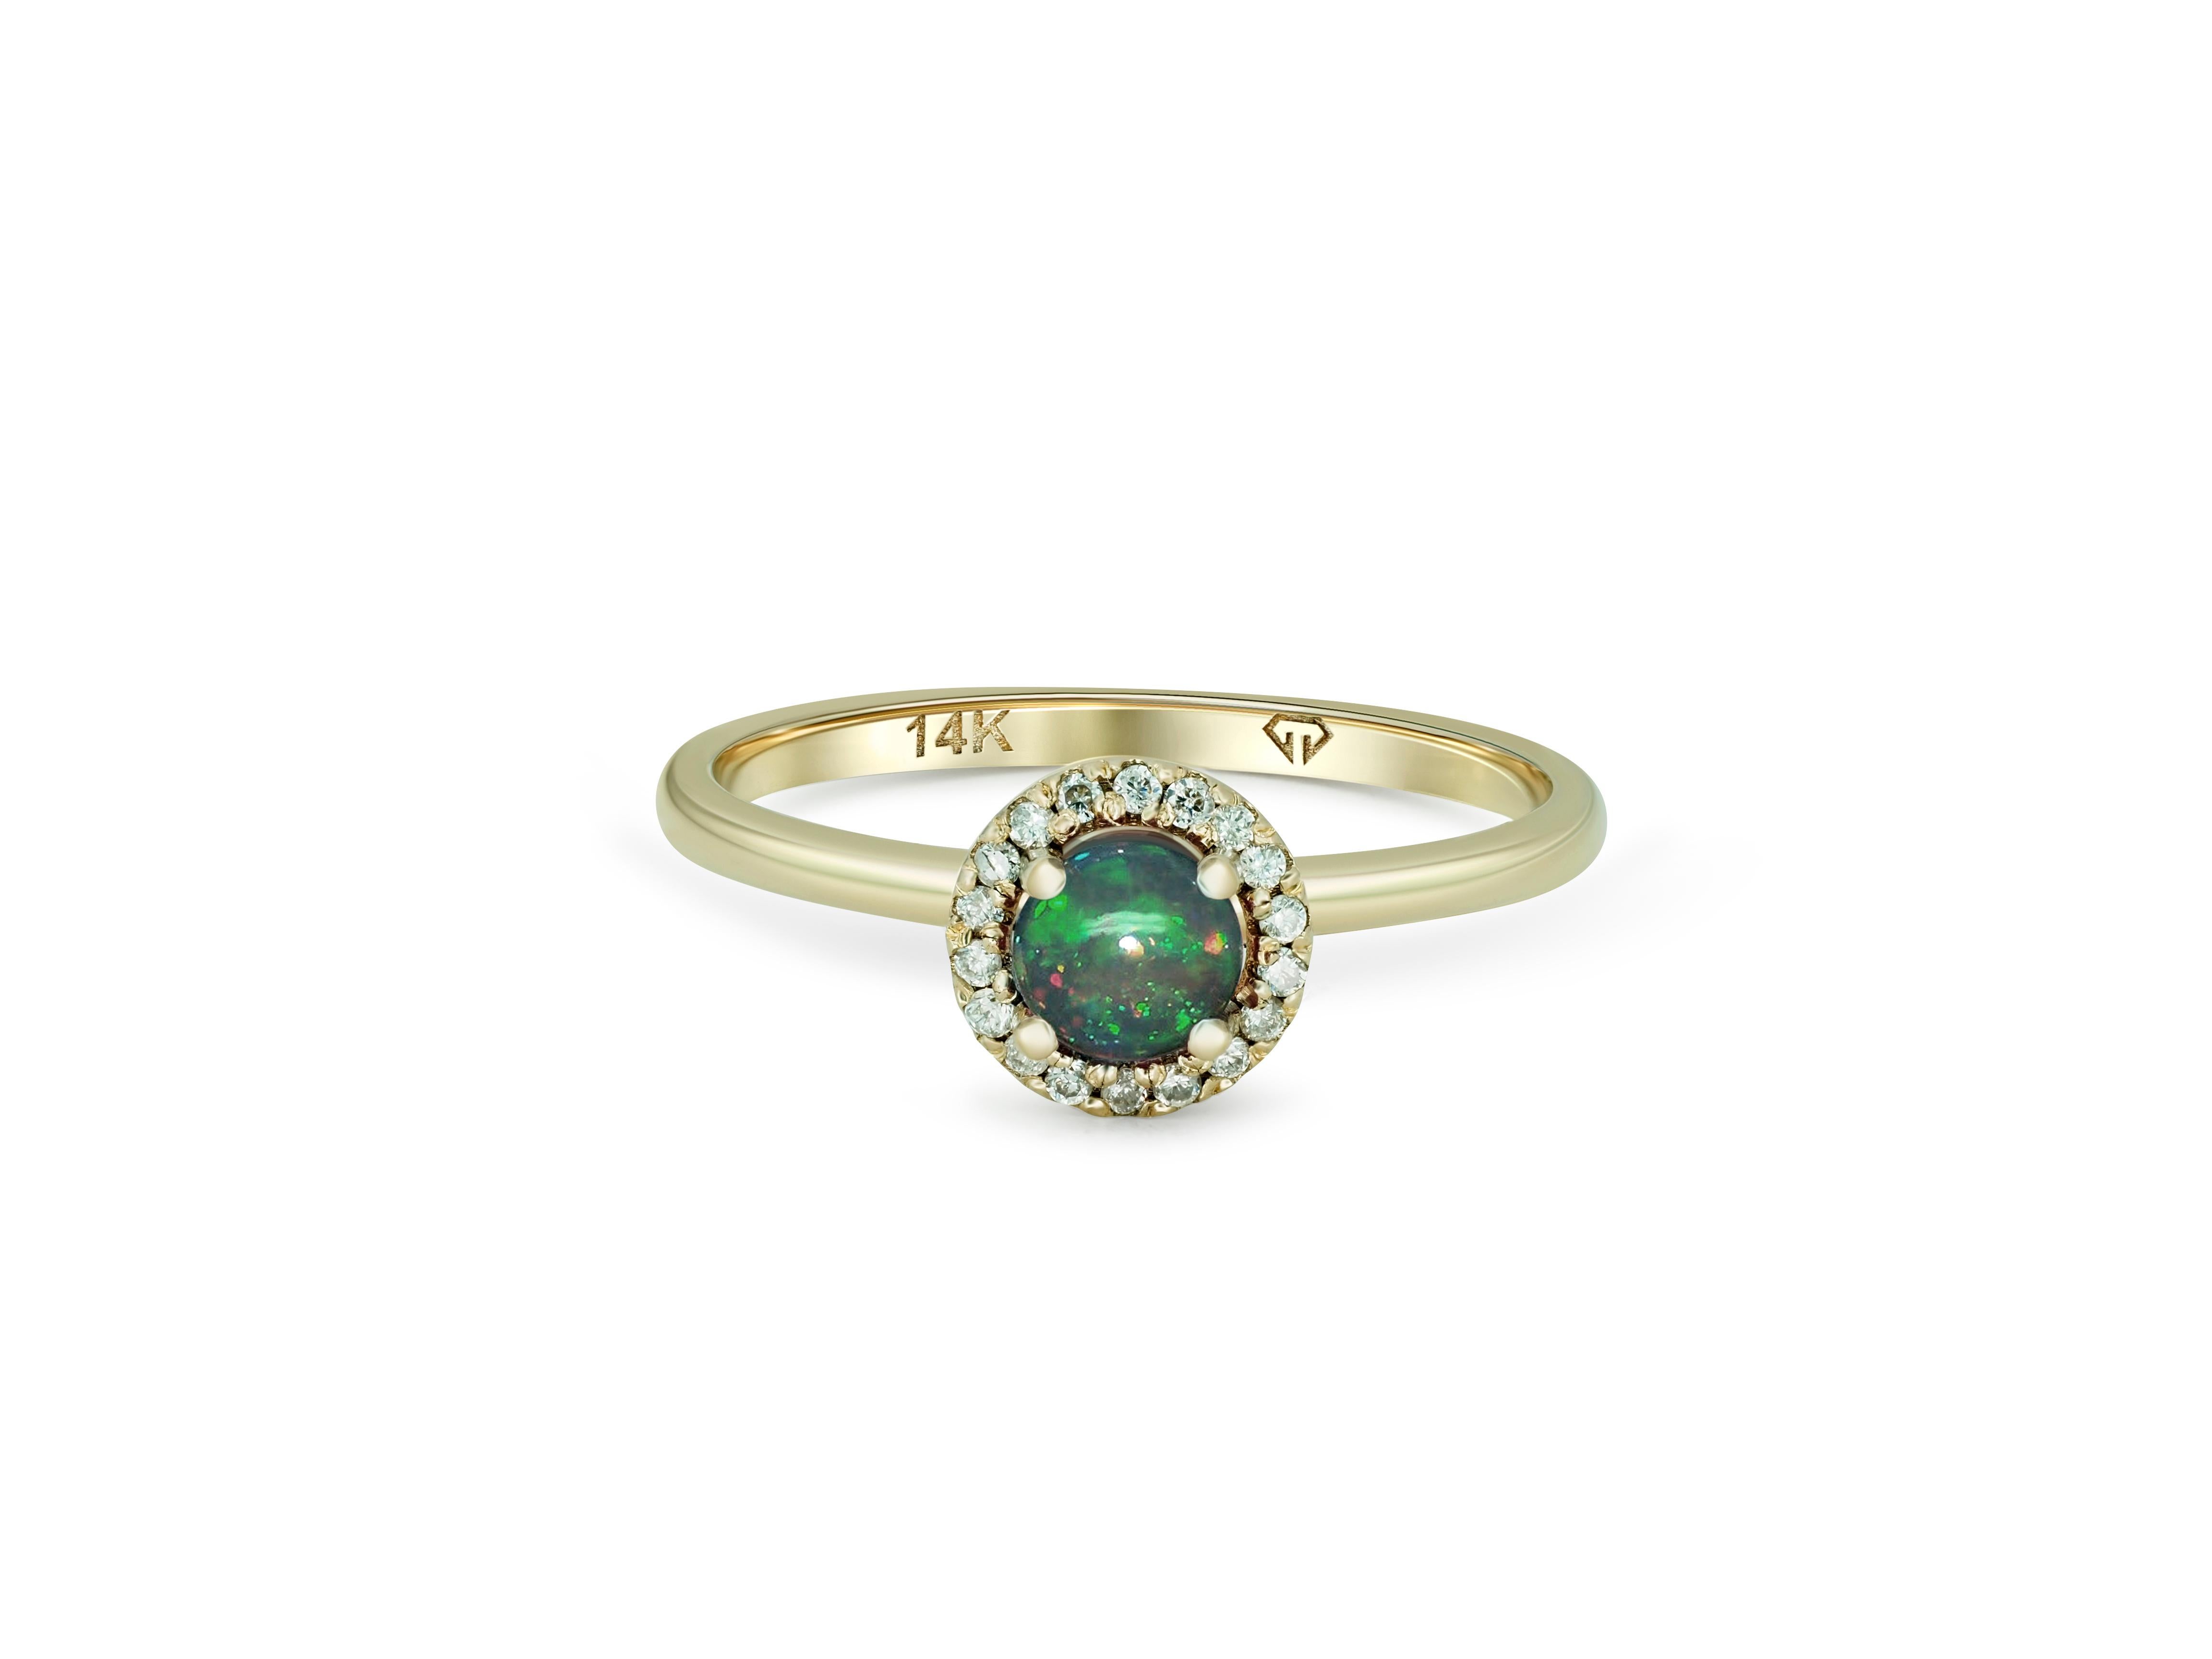 Diamond Halo Opal Ring in 14k Gold. 
Opal gold ring. Opal engagement ring. Round opal ring. Everyday opal ring. October birthstone opal ring.

Metal type: Gold
Metal stamp: 14k Gold
Weight: 2 gr - depends from size

Central gemstone:
Opal: round